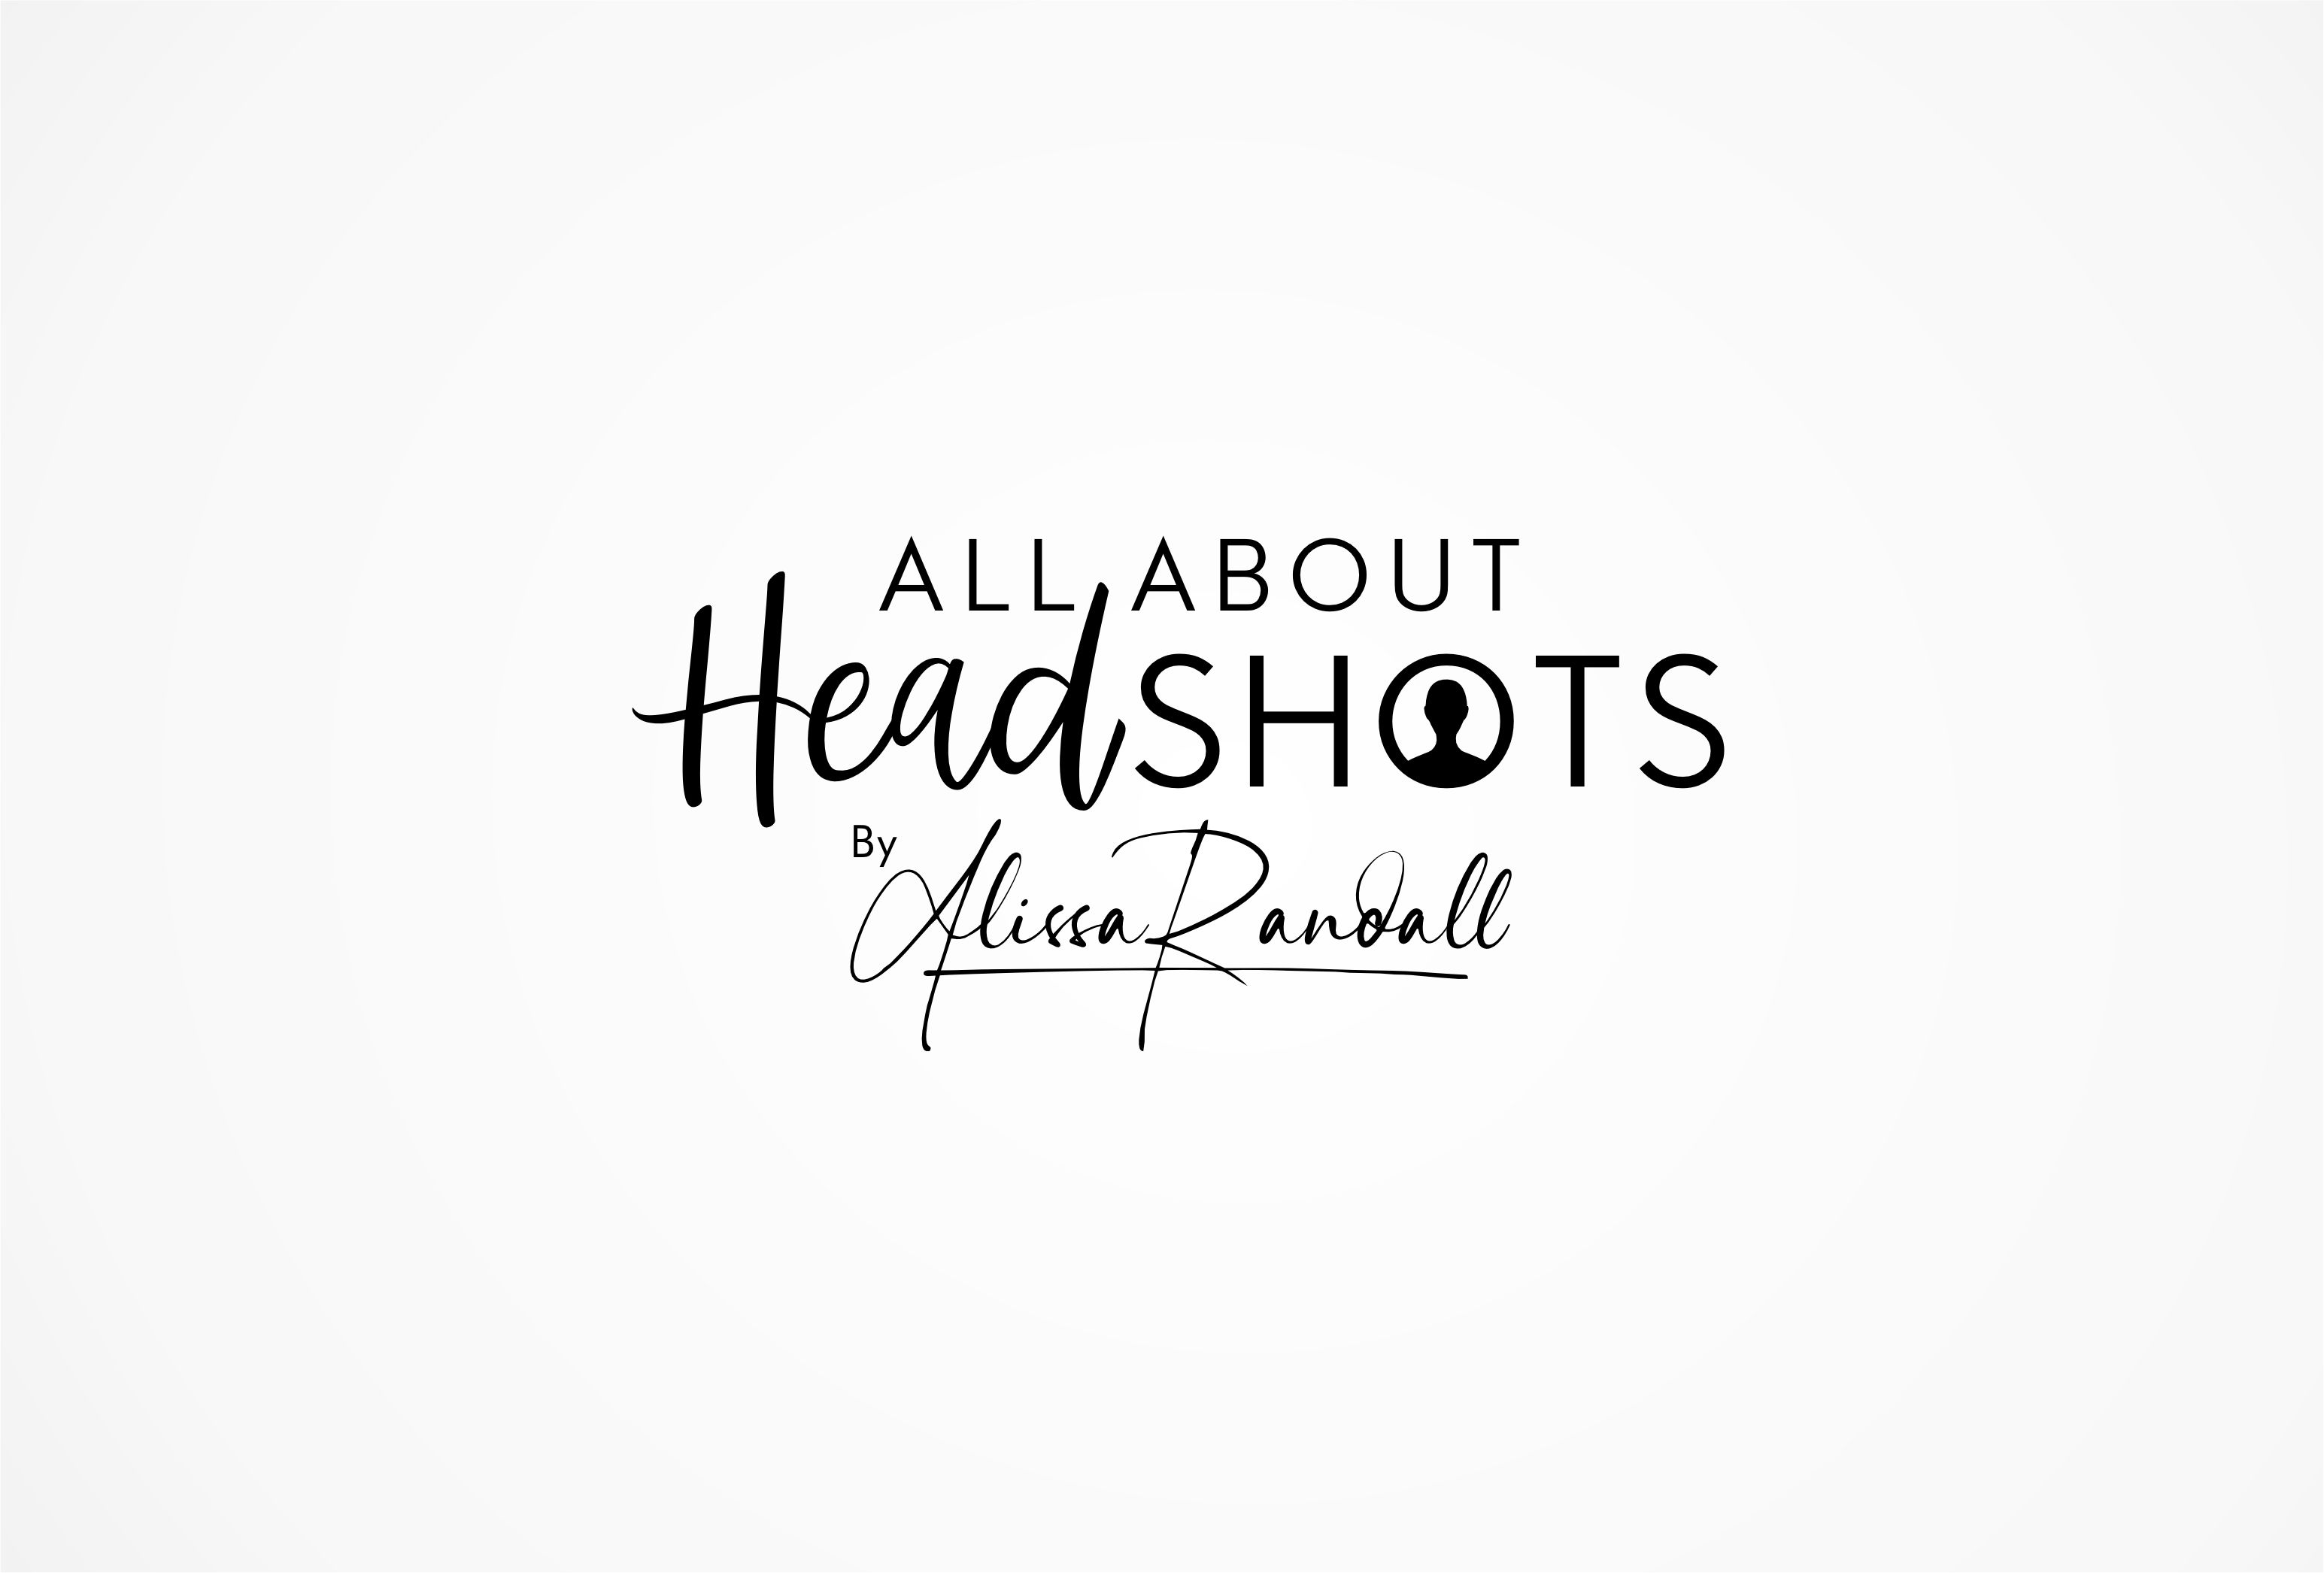 All About Headshots